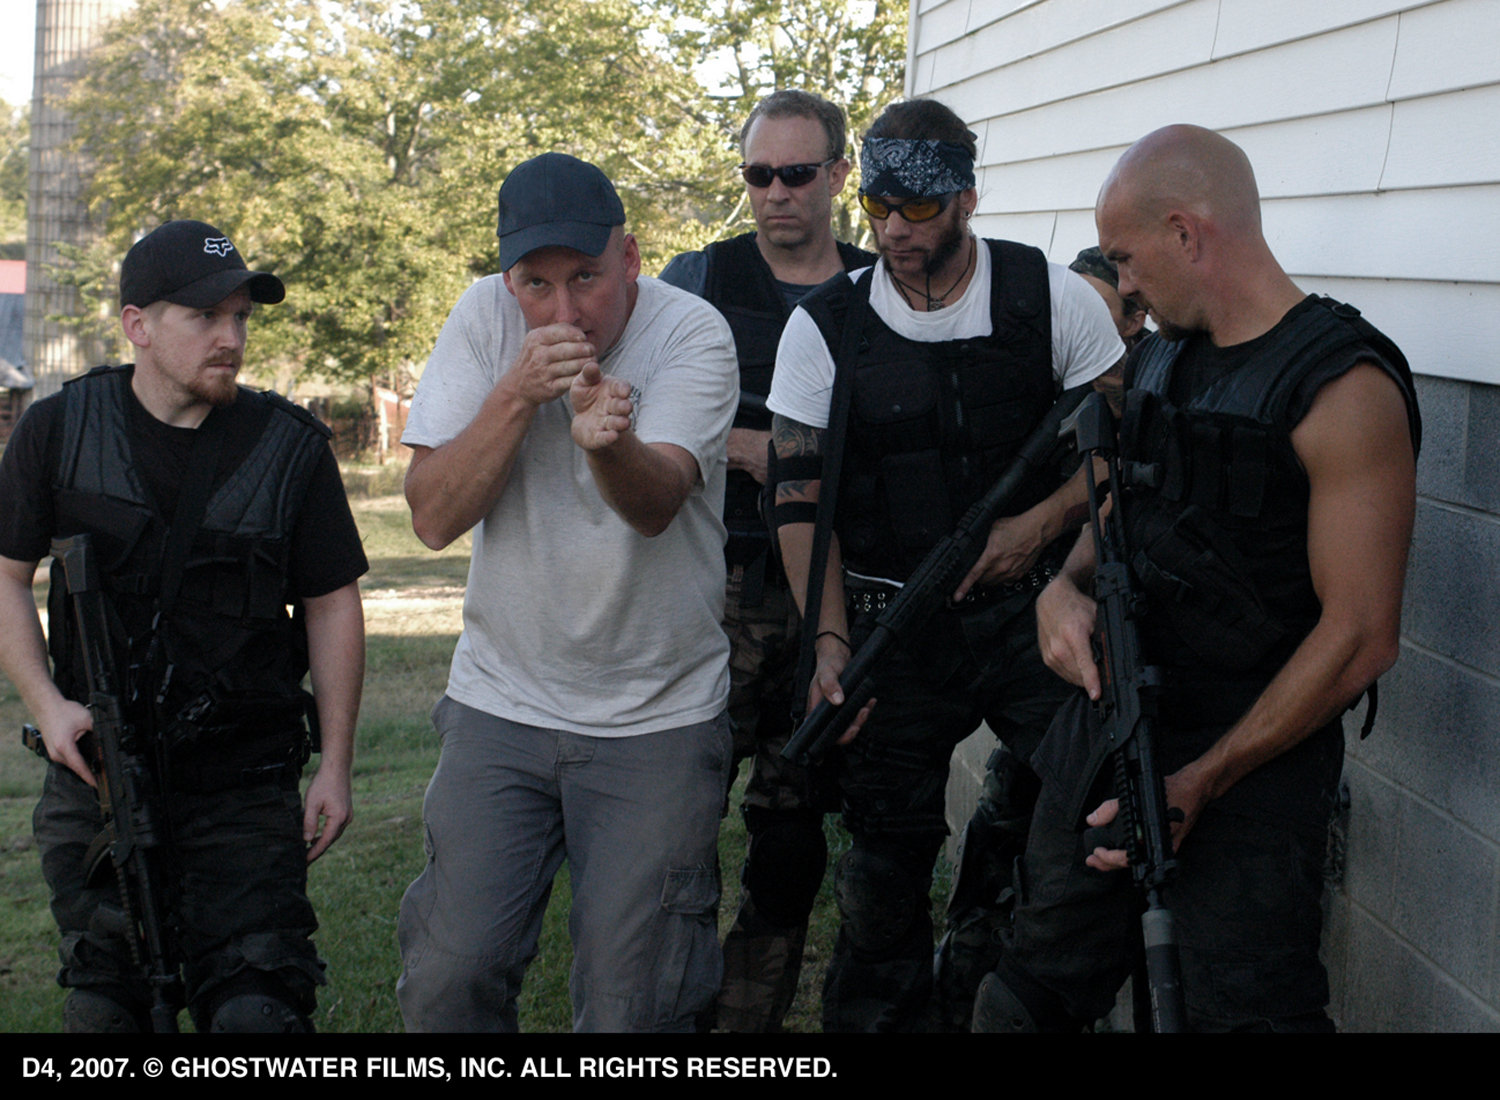 Michael Henderson instructs the cast on weapons handling and team movement during pre-production training.